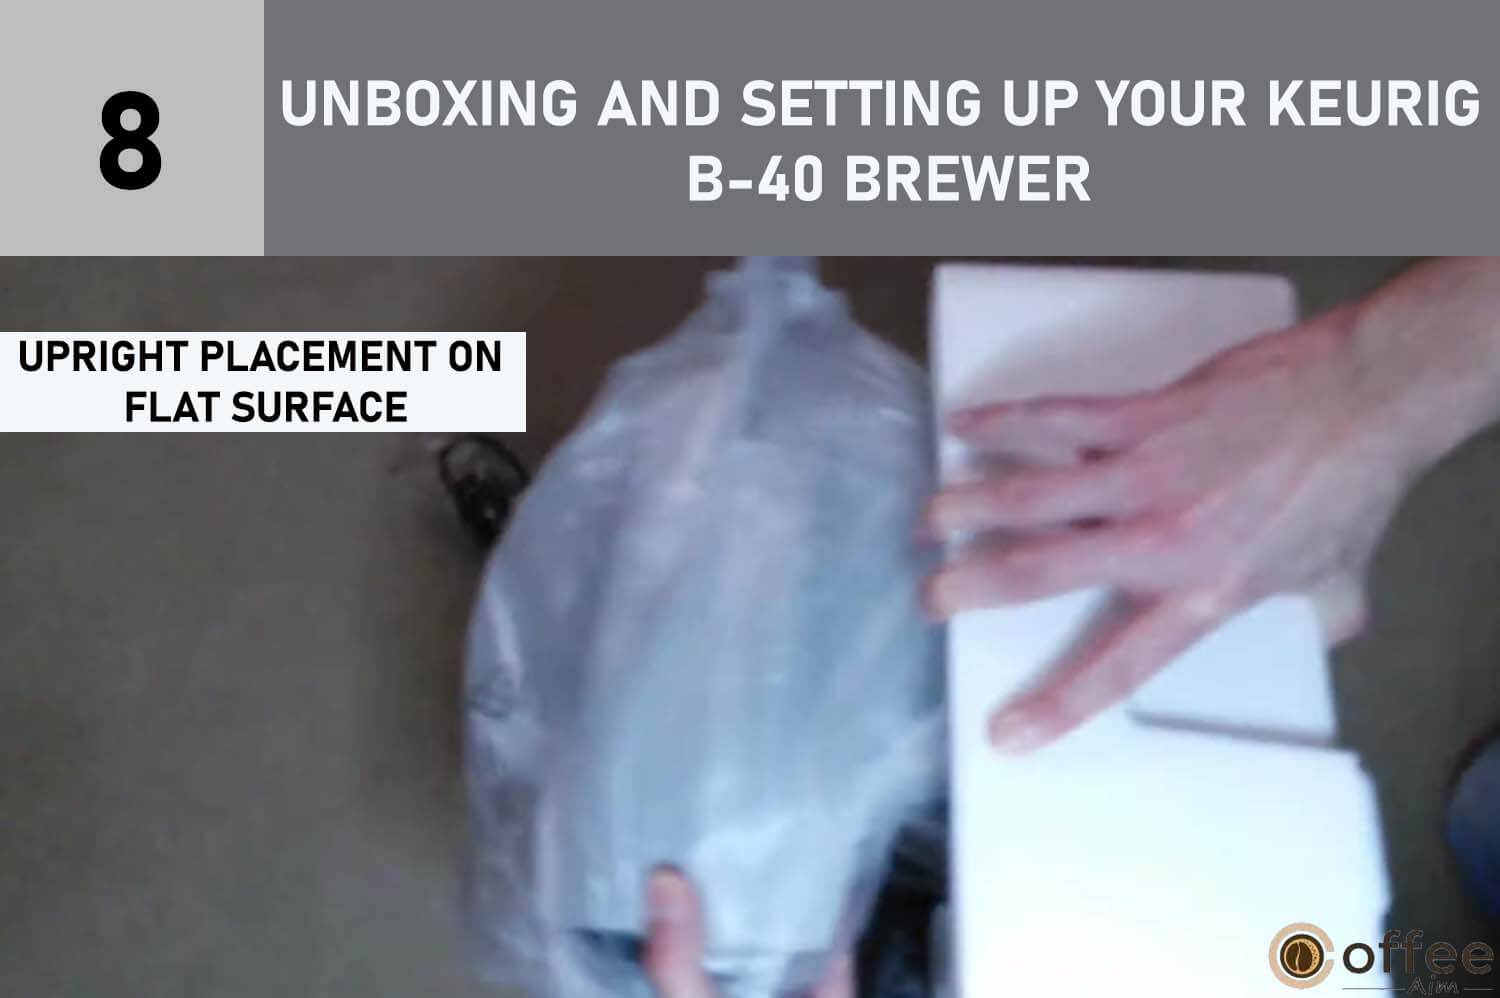 The image illustrates the concept of "upright placement on a flat surface," an essential step within the comprehensive guide titled "Unboxing and Setting Up Your Keurig B-40 Brewer." This comprehensive article forms a part of the instructional series on "How to Use Keurig B-40